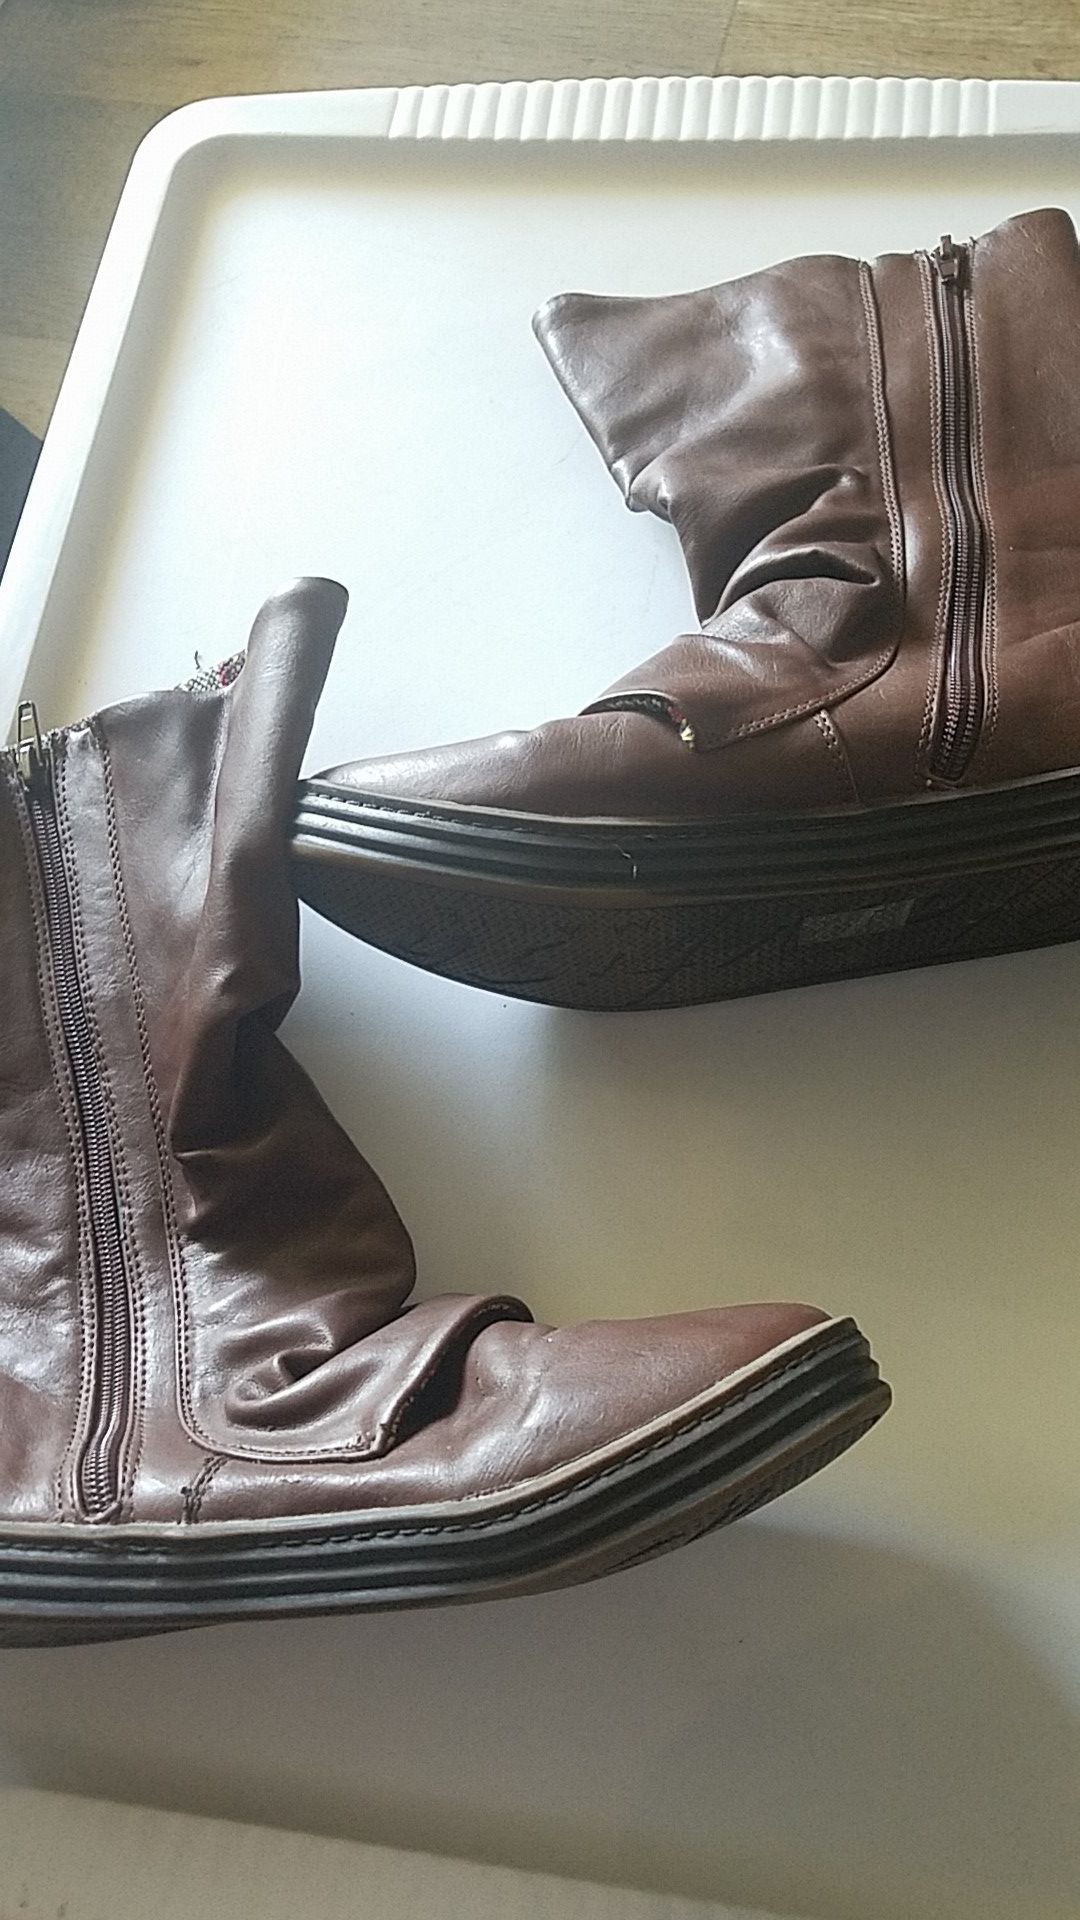 Women's size 9 boots